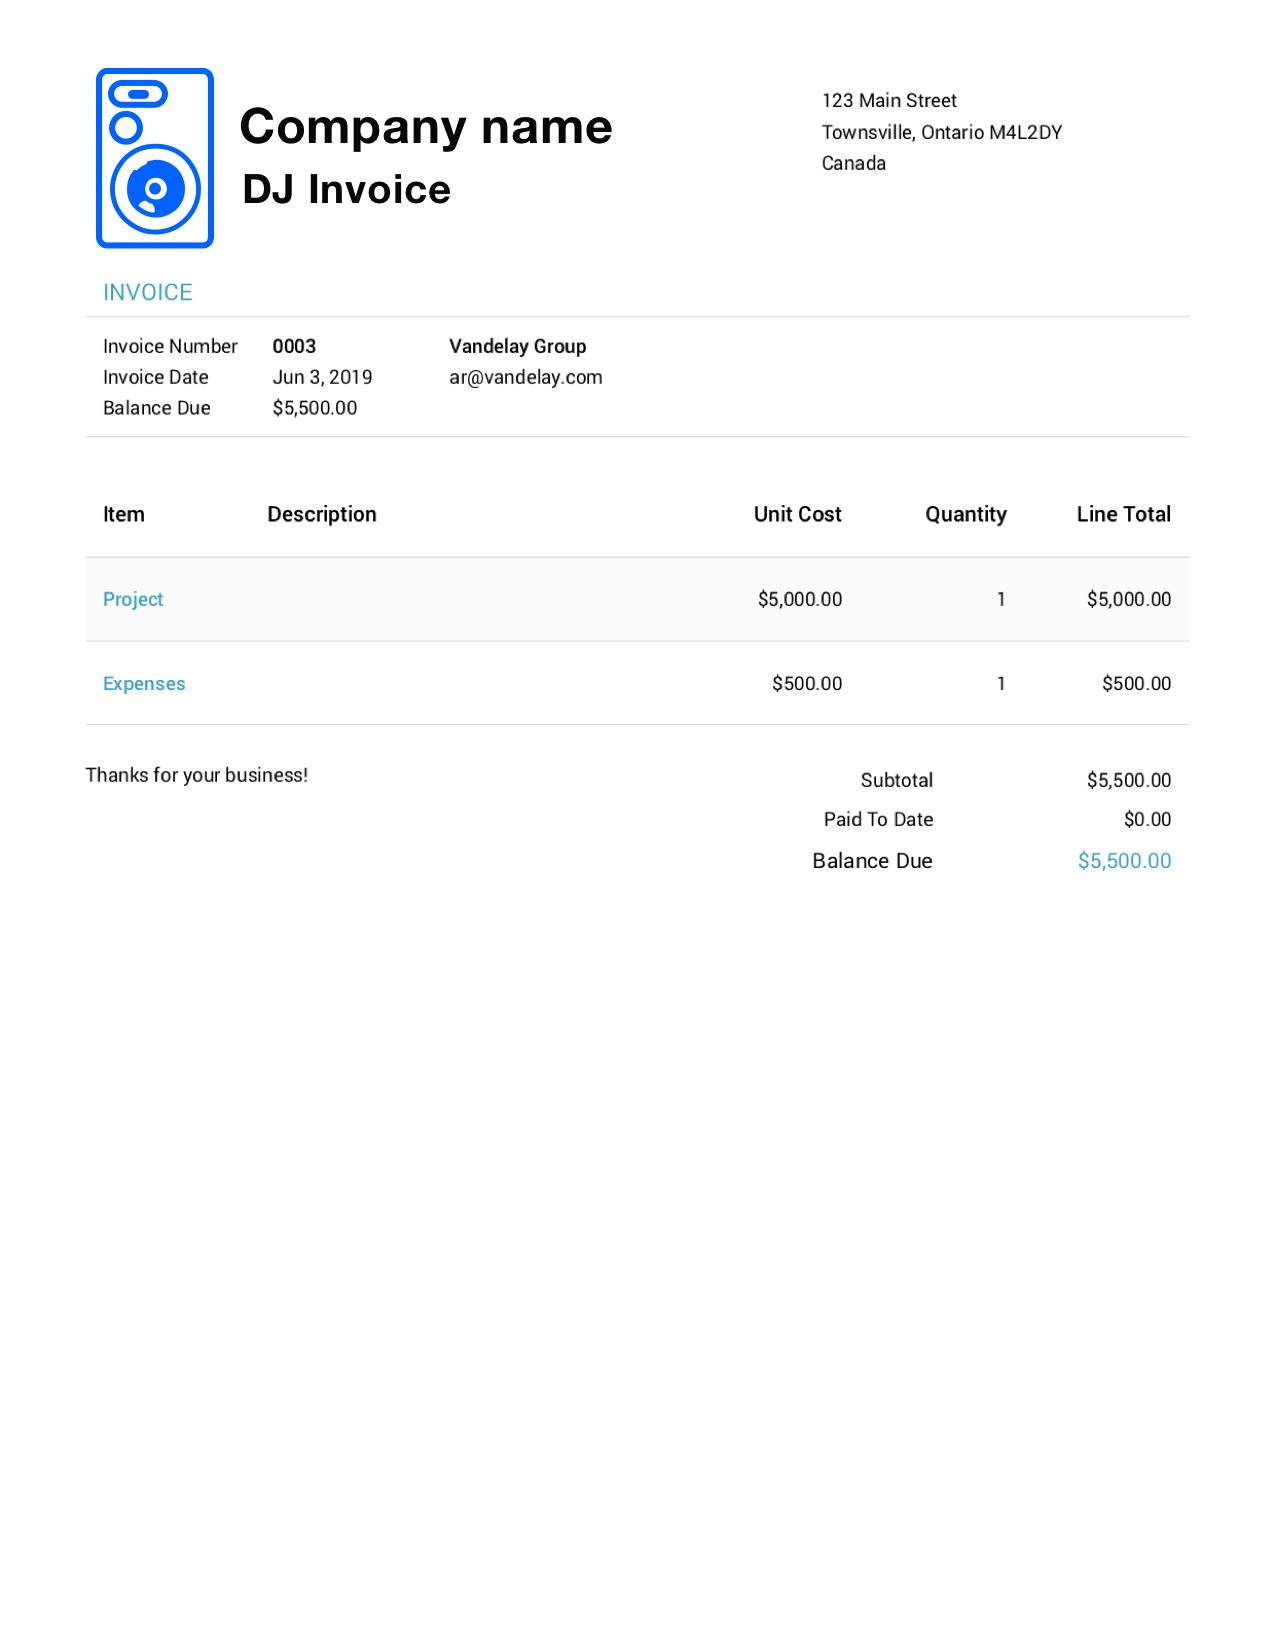 Free Dj Invoice Template. Customize and Send in 20 Seconds Throughout Invoice Template For Dj Services